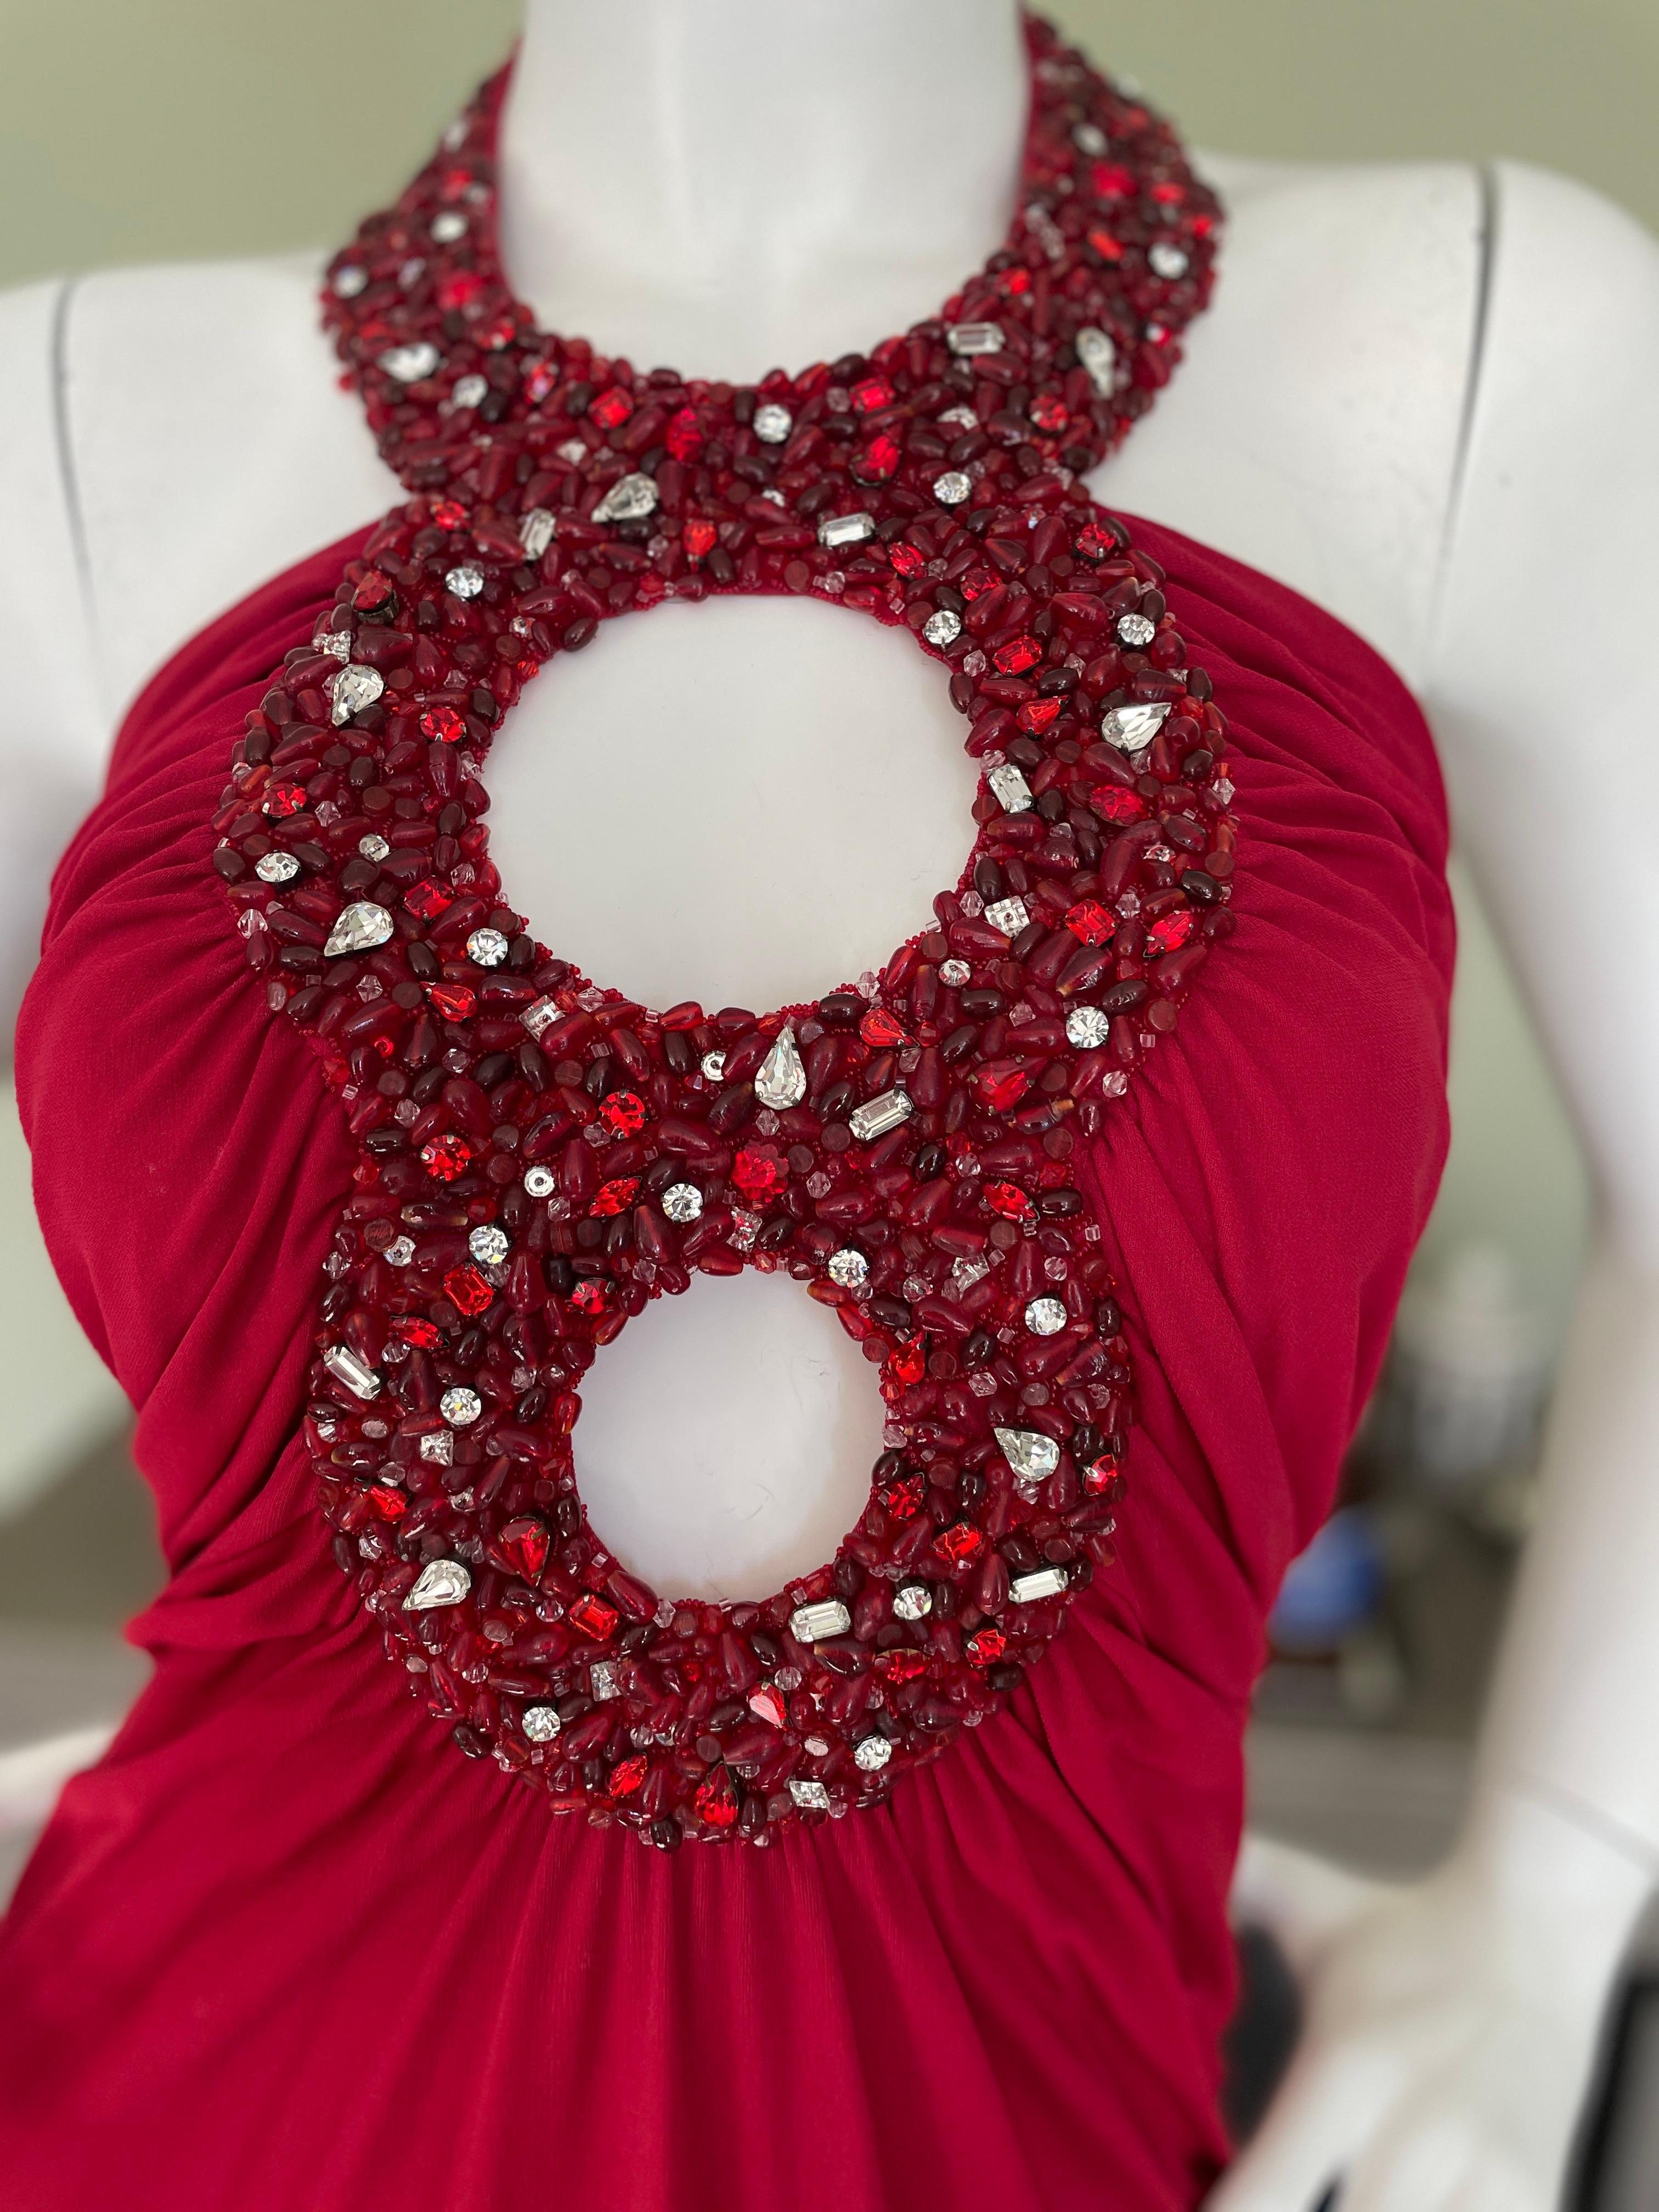 Azzaro Vintage Red Cocktail Dress with Jeweled Keyhole In Excellent Condition For Sale In Cloverdale, CA